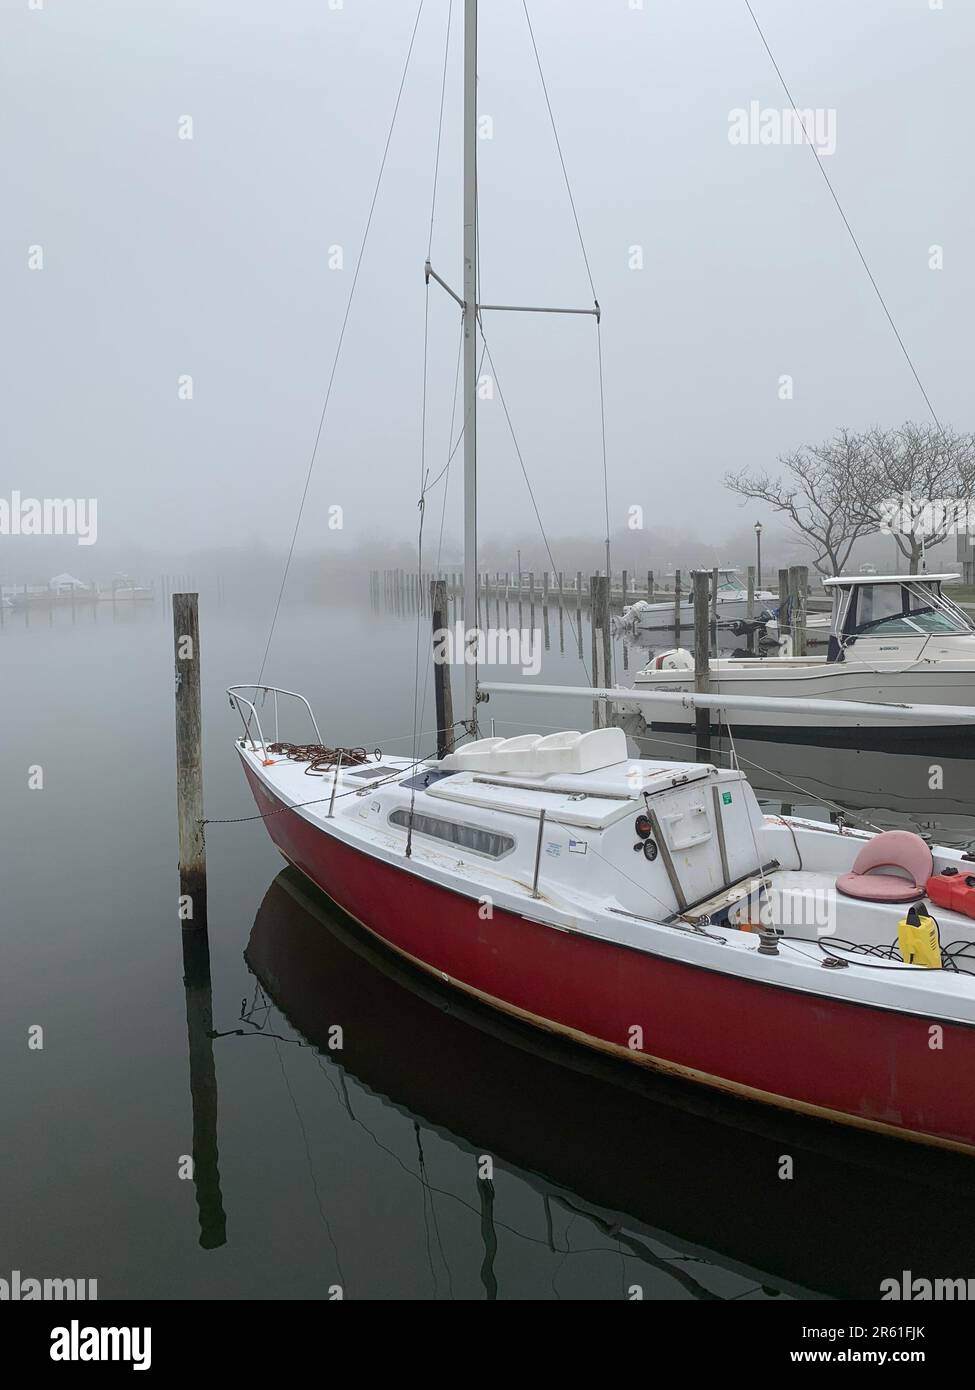 Boats are tied to wooden pylons at a dock on a foggy and stormy day near the water Stock Photo